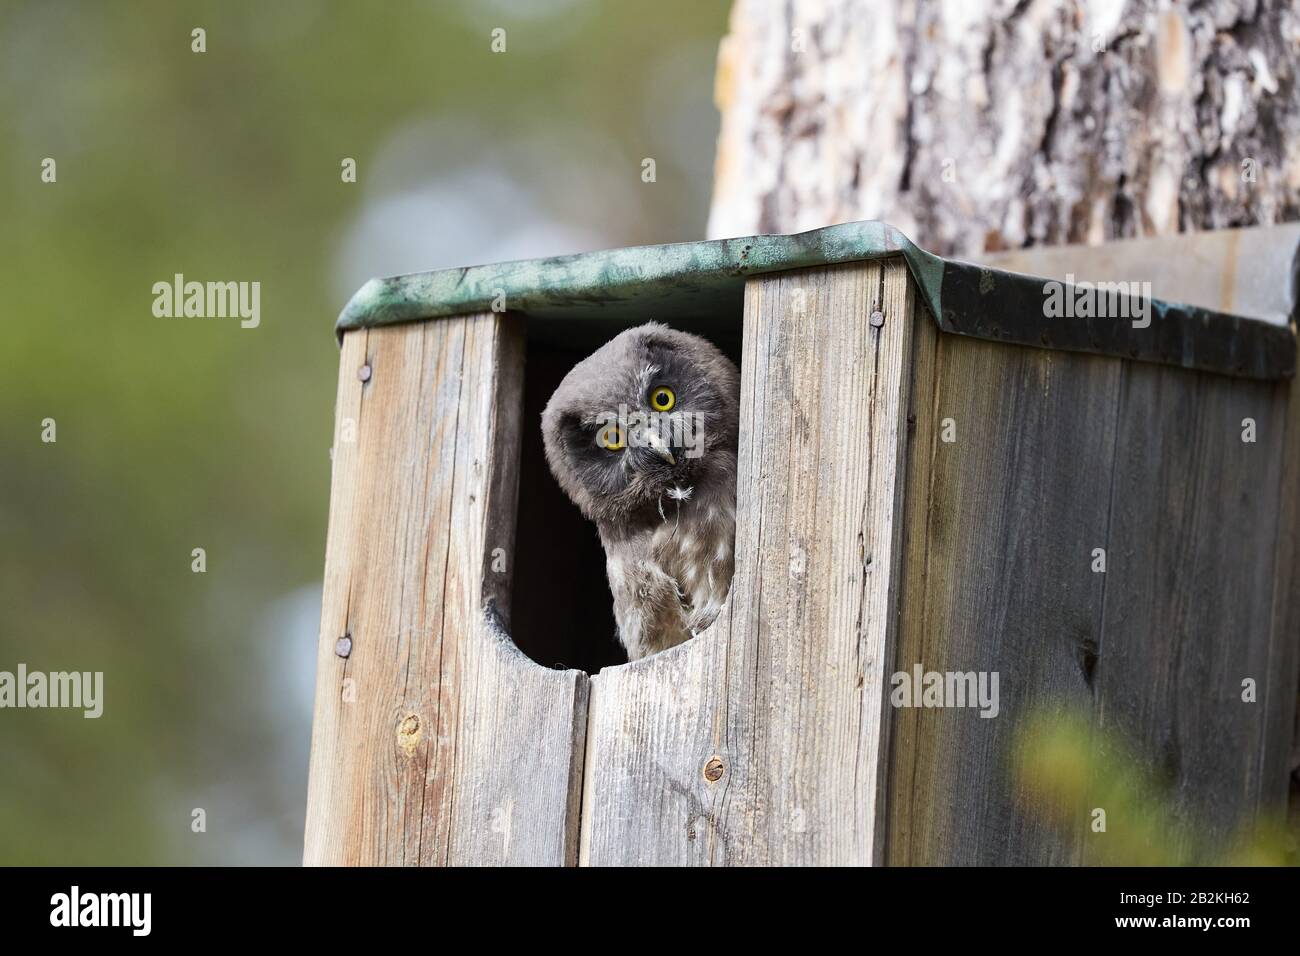 Grey Owl fledgling peeping out of a nesting box Stock Photo